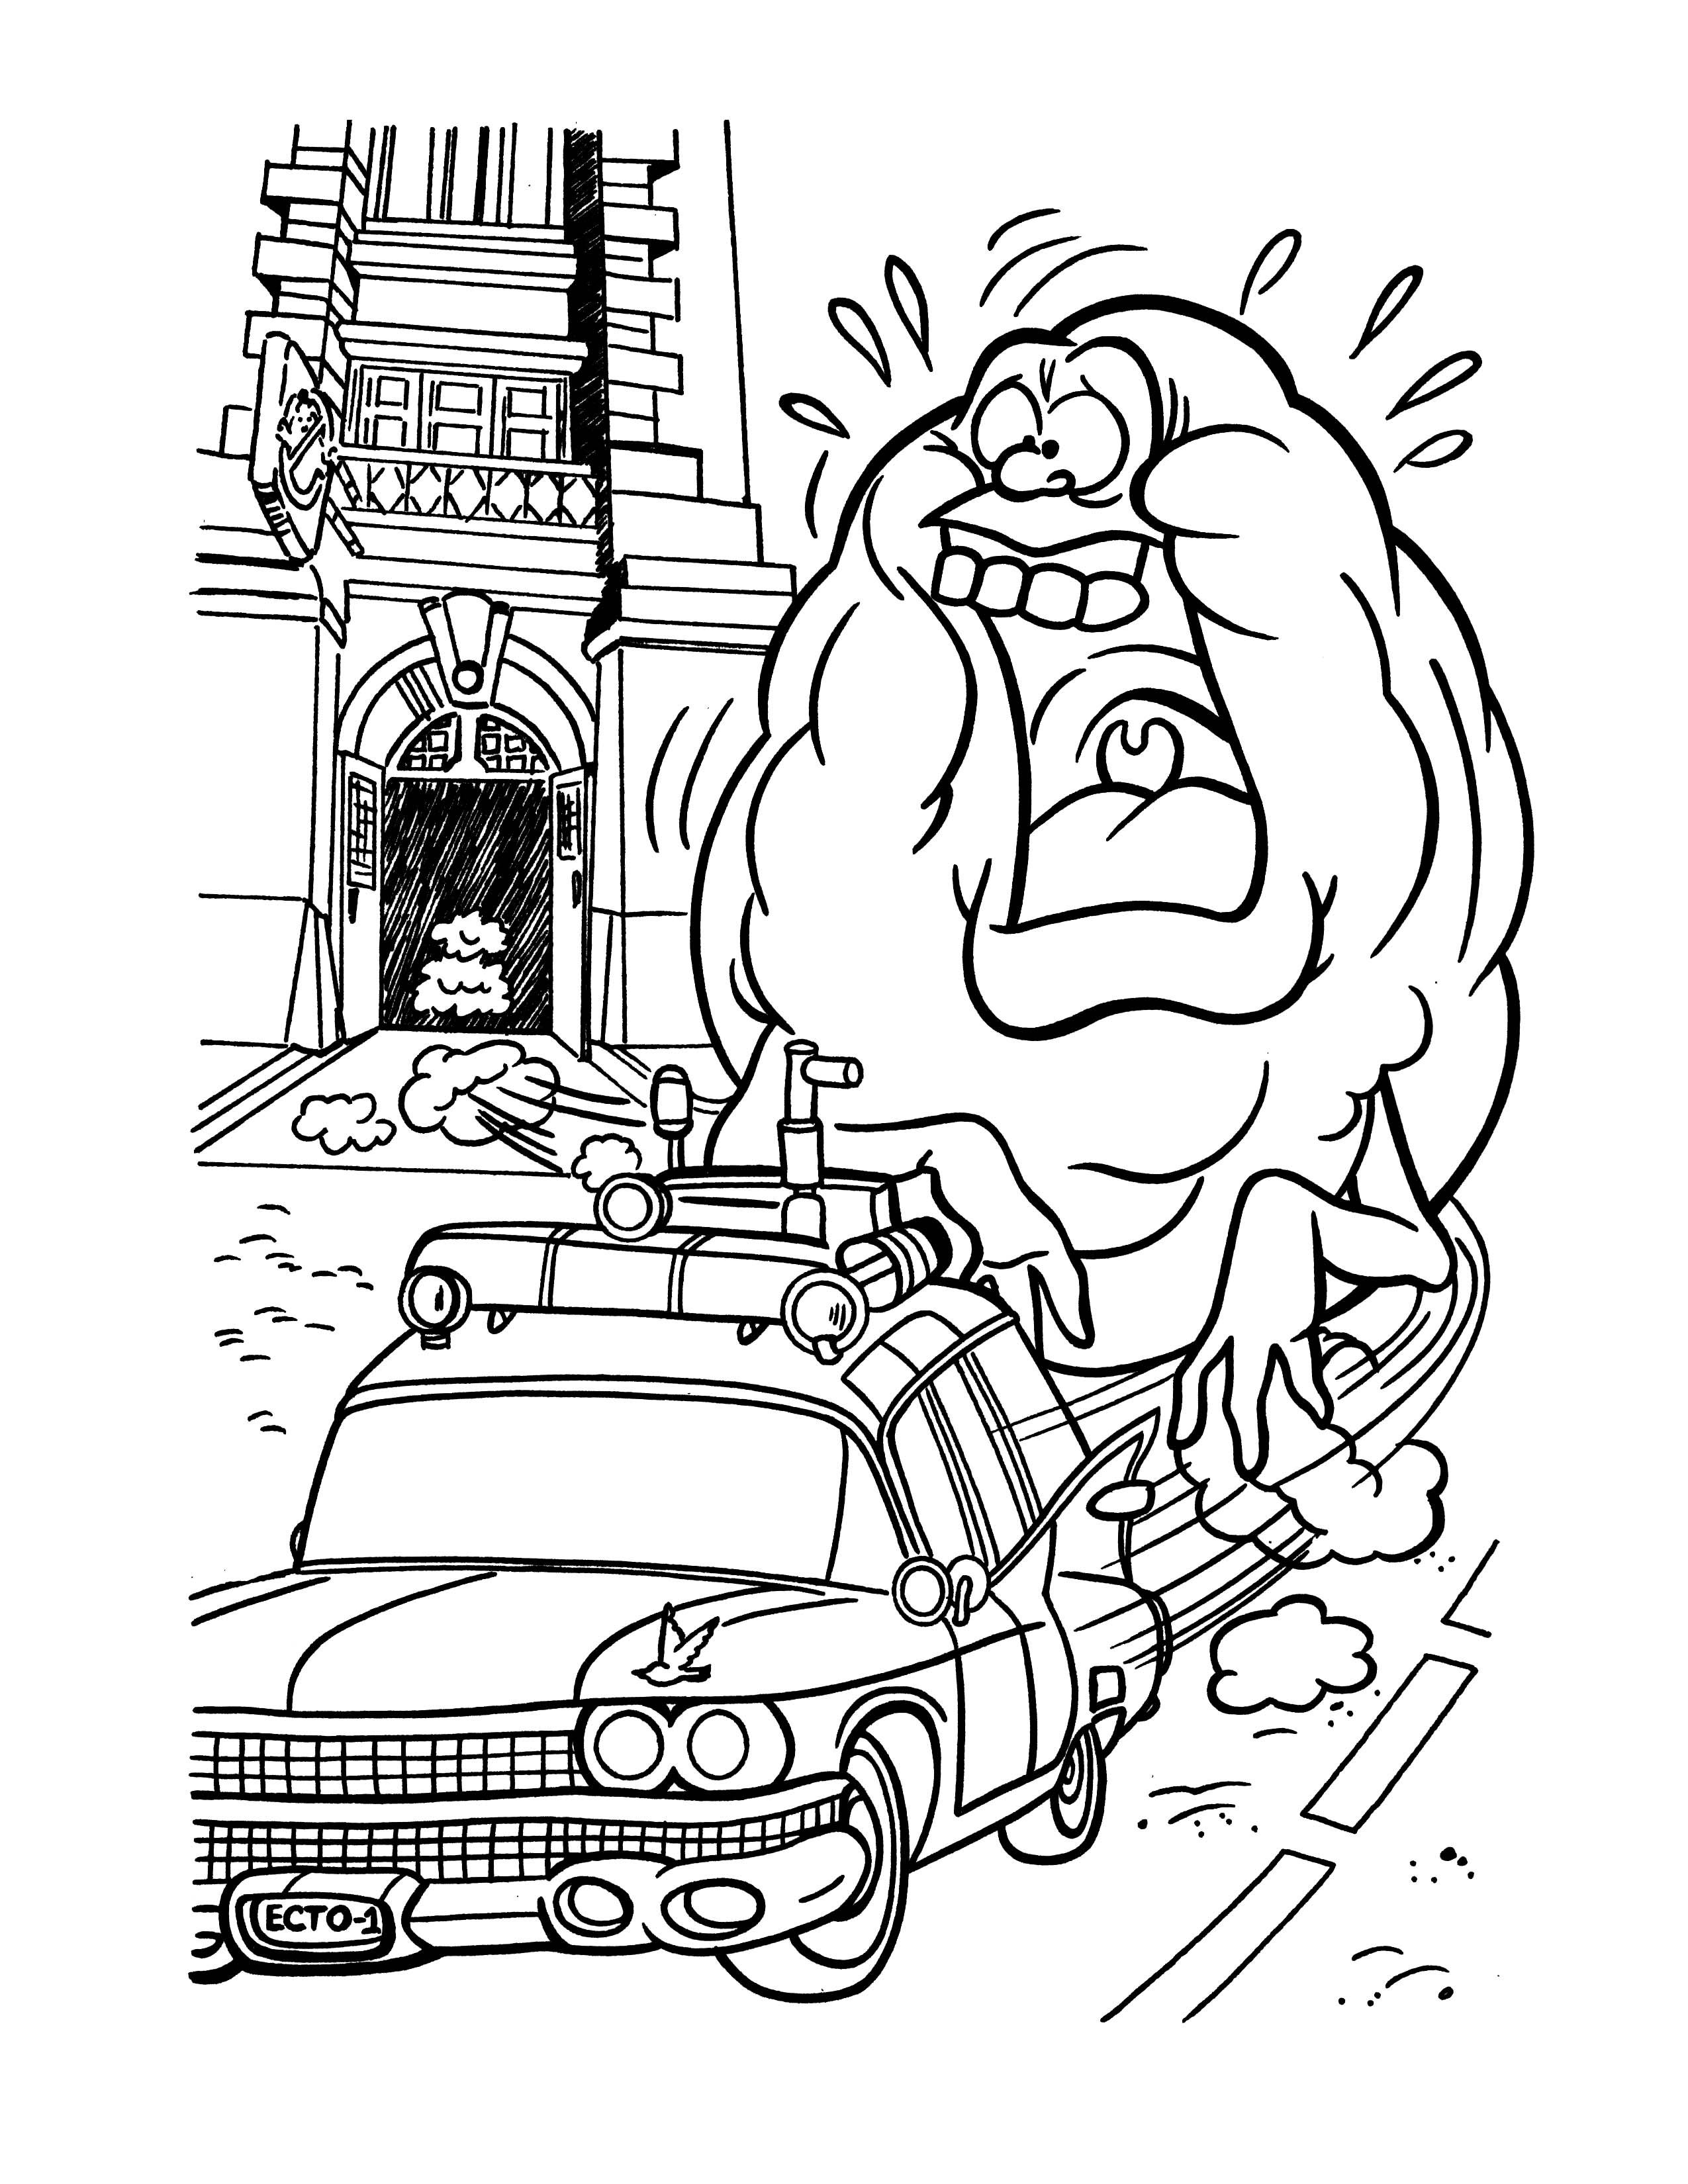 Printable Ghostbusters Coloring Pages Pdf - Ghostbusters Car Coloring Pages